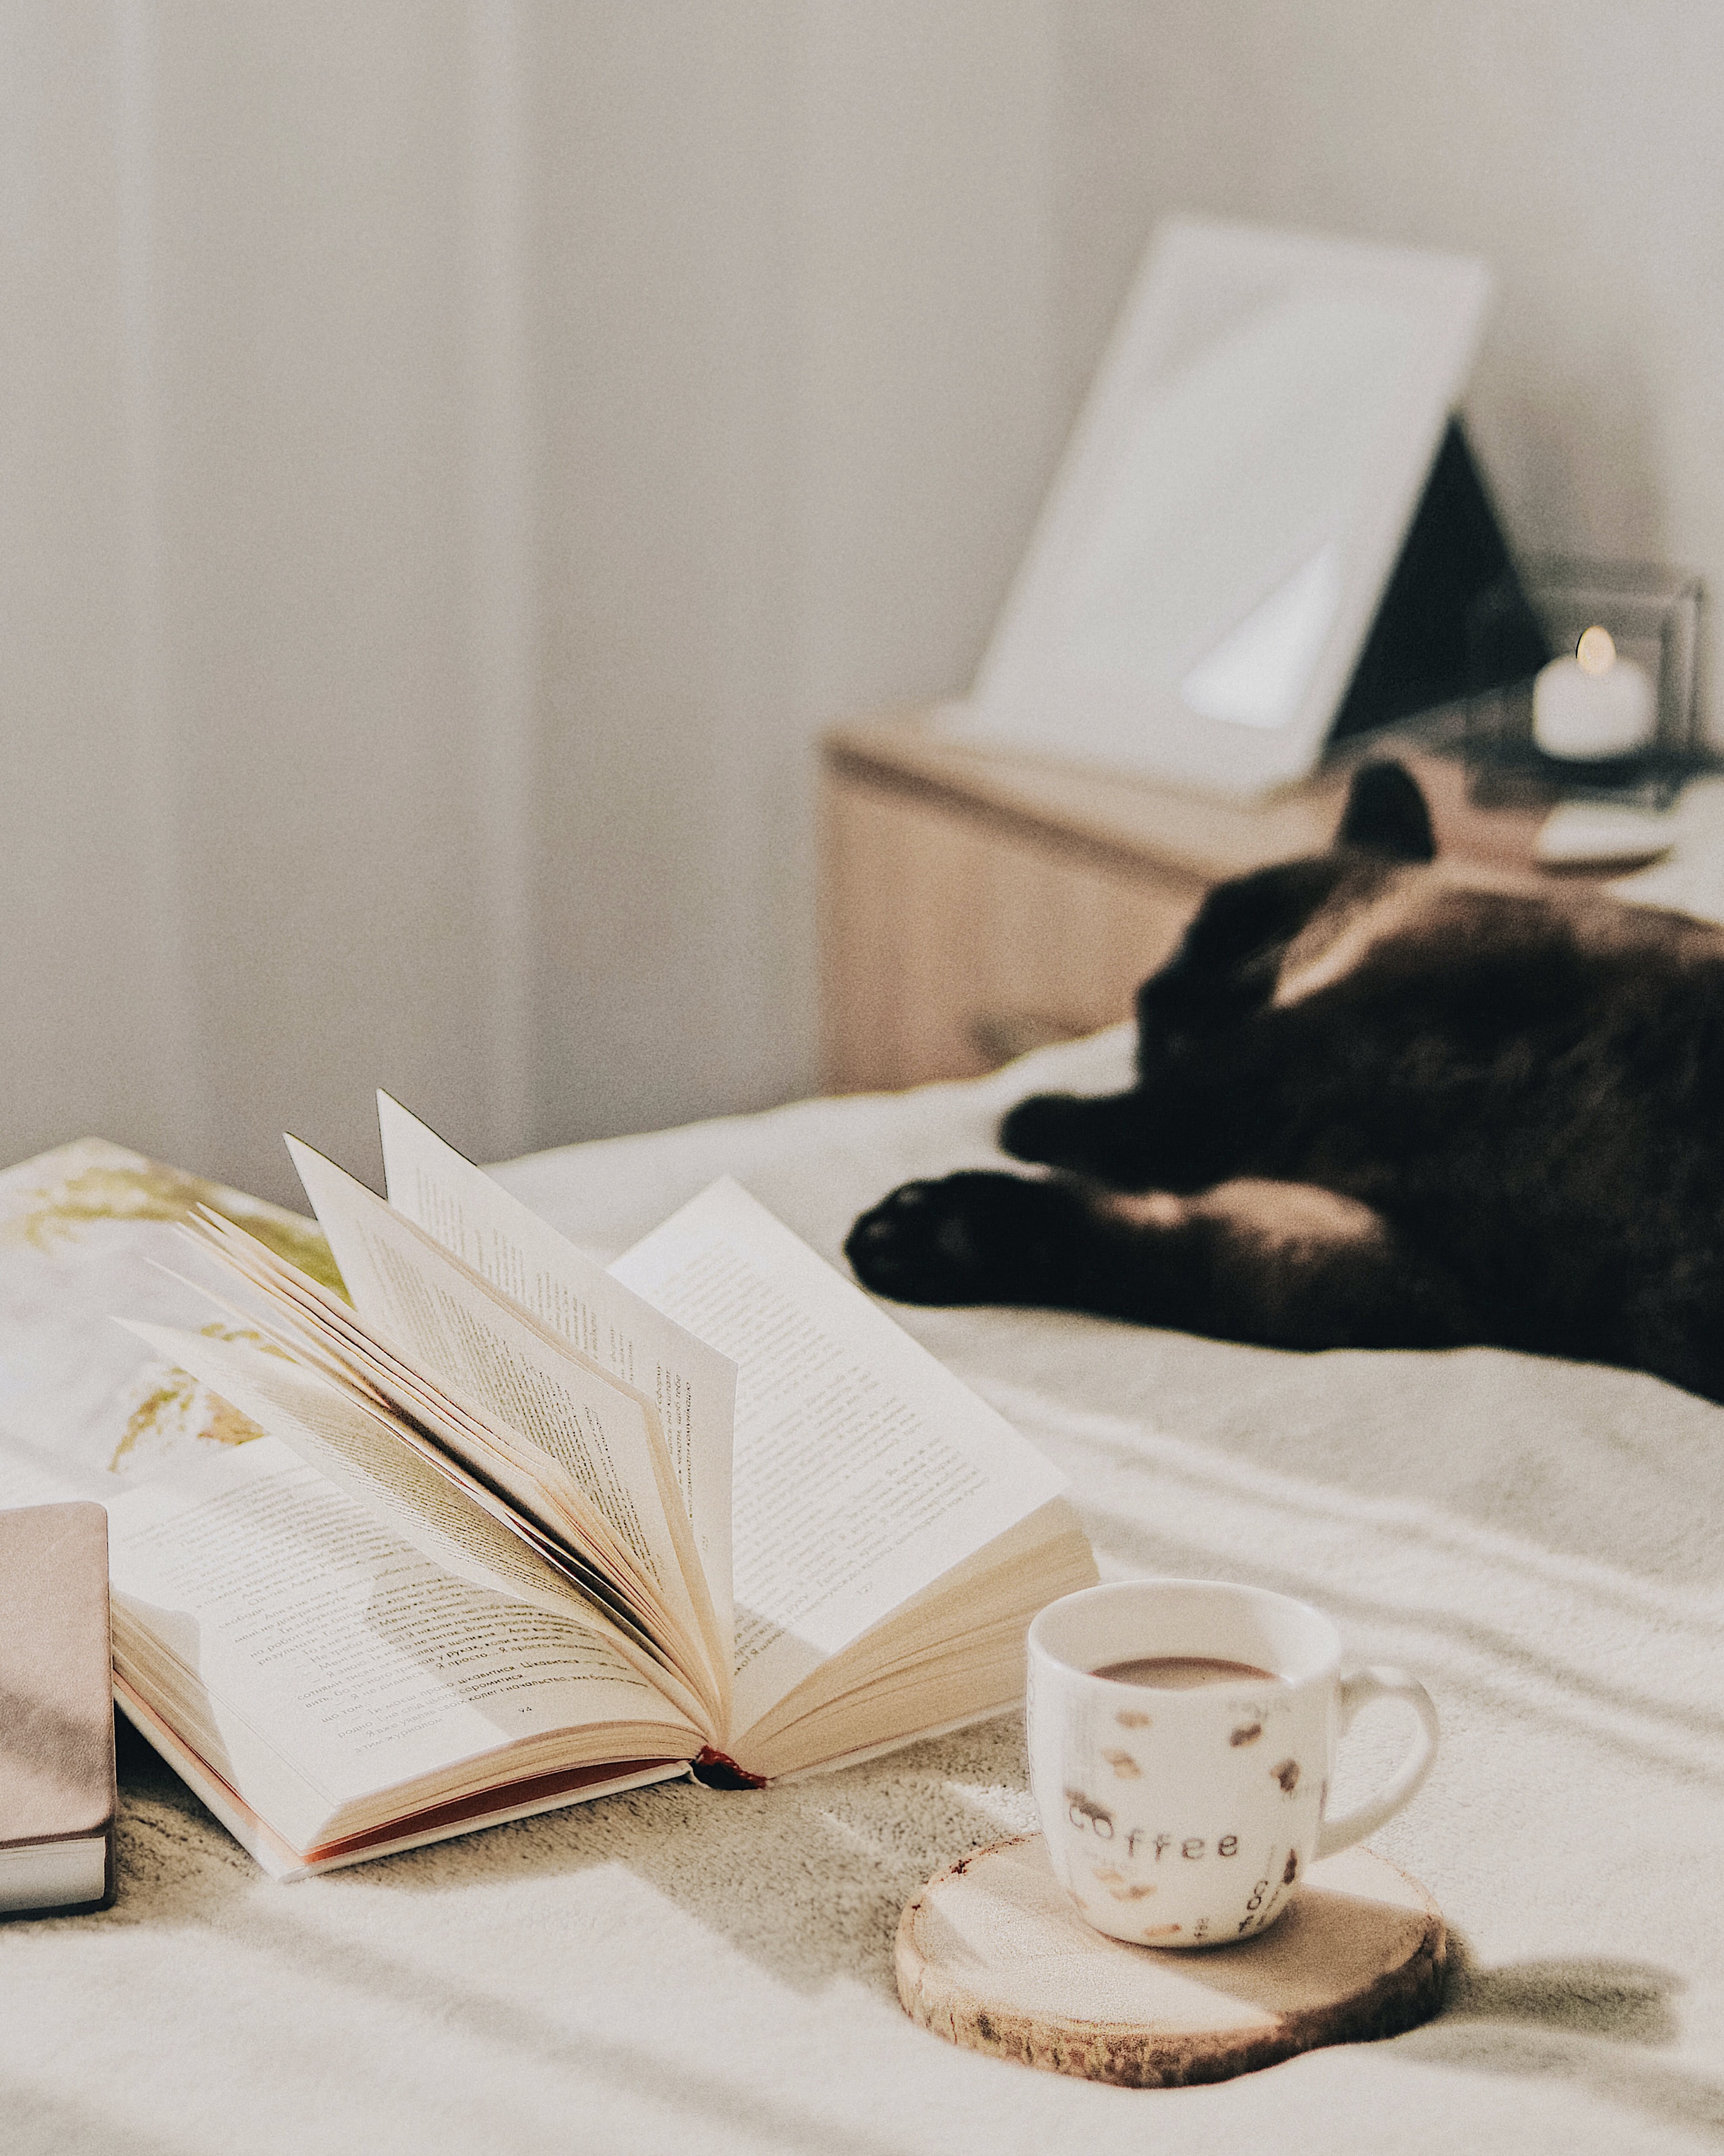 coffee, miscellanea, miscellaneous, cat, cup, book, pages, page